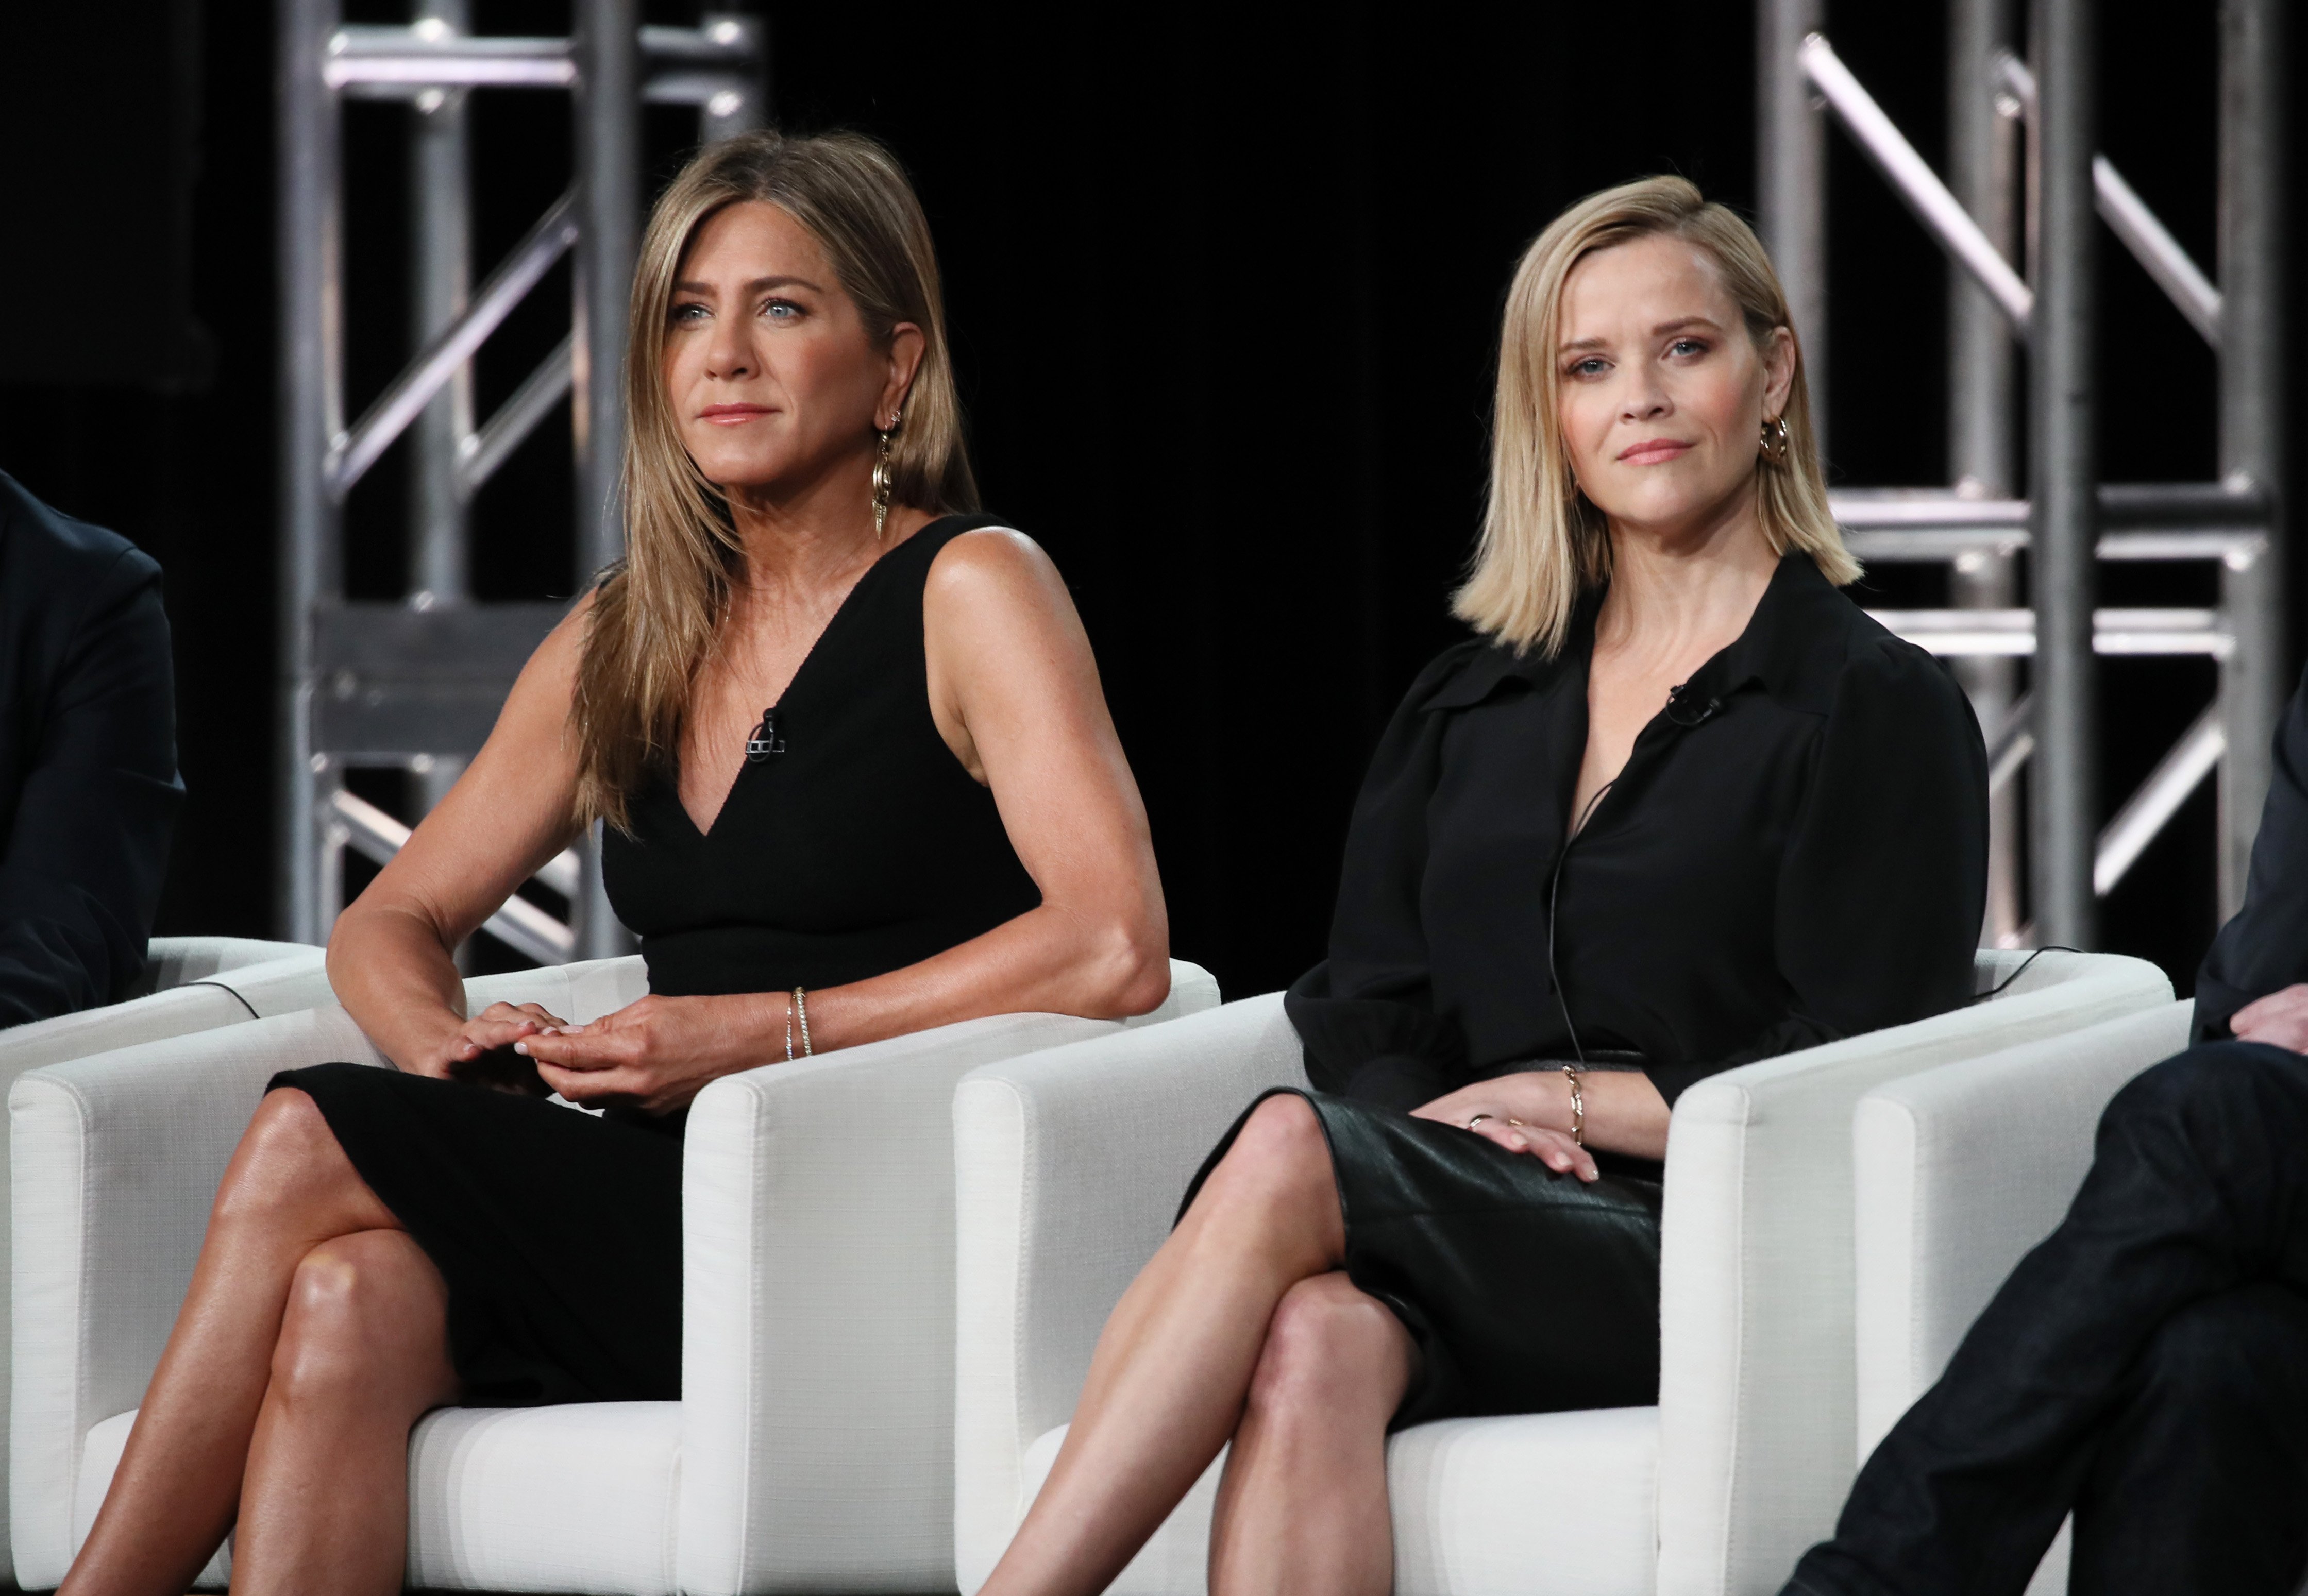 Jennifer Aniston and Reese Witherspoon sit side by side in white chairs wearing black dresses.